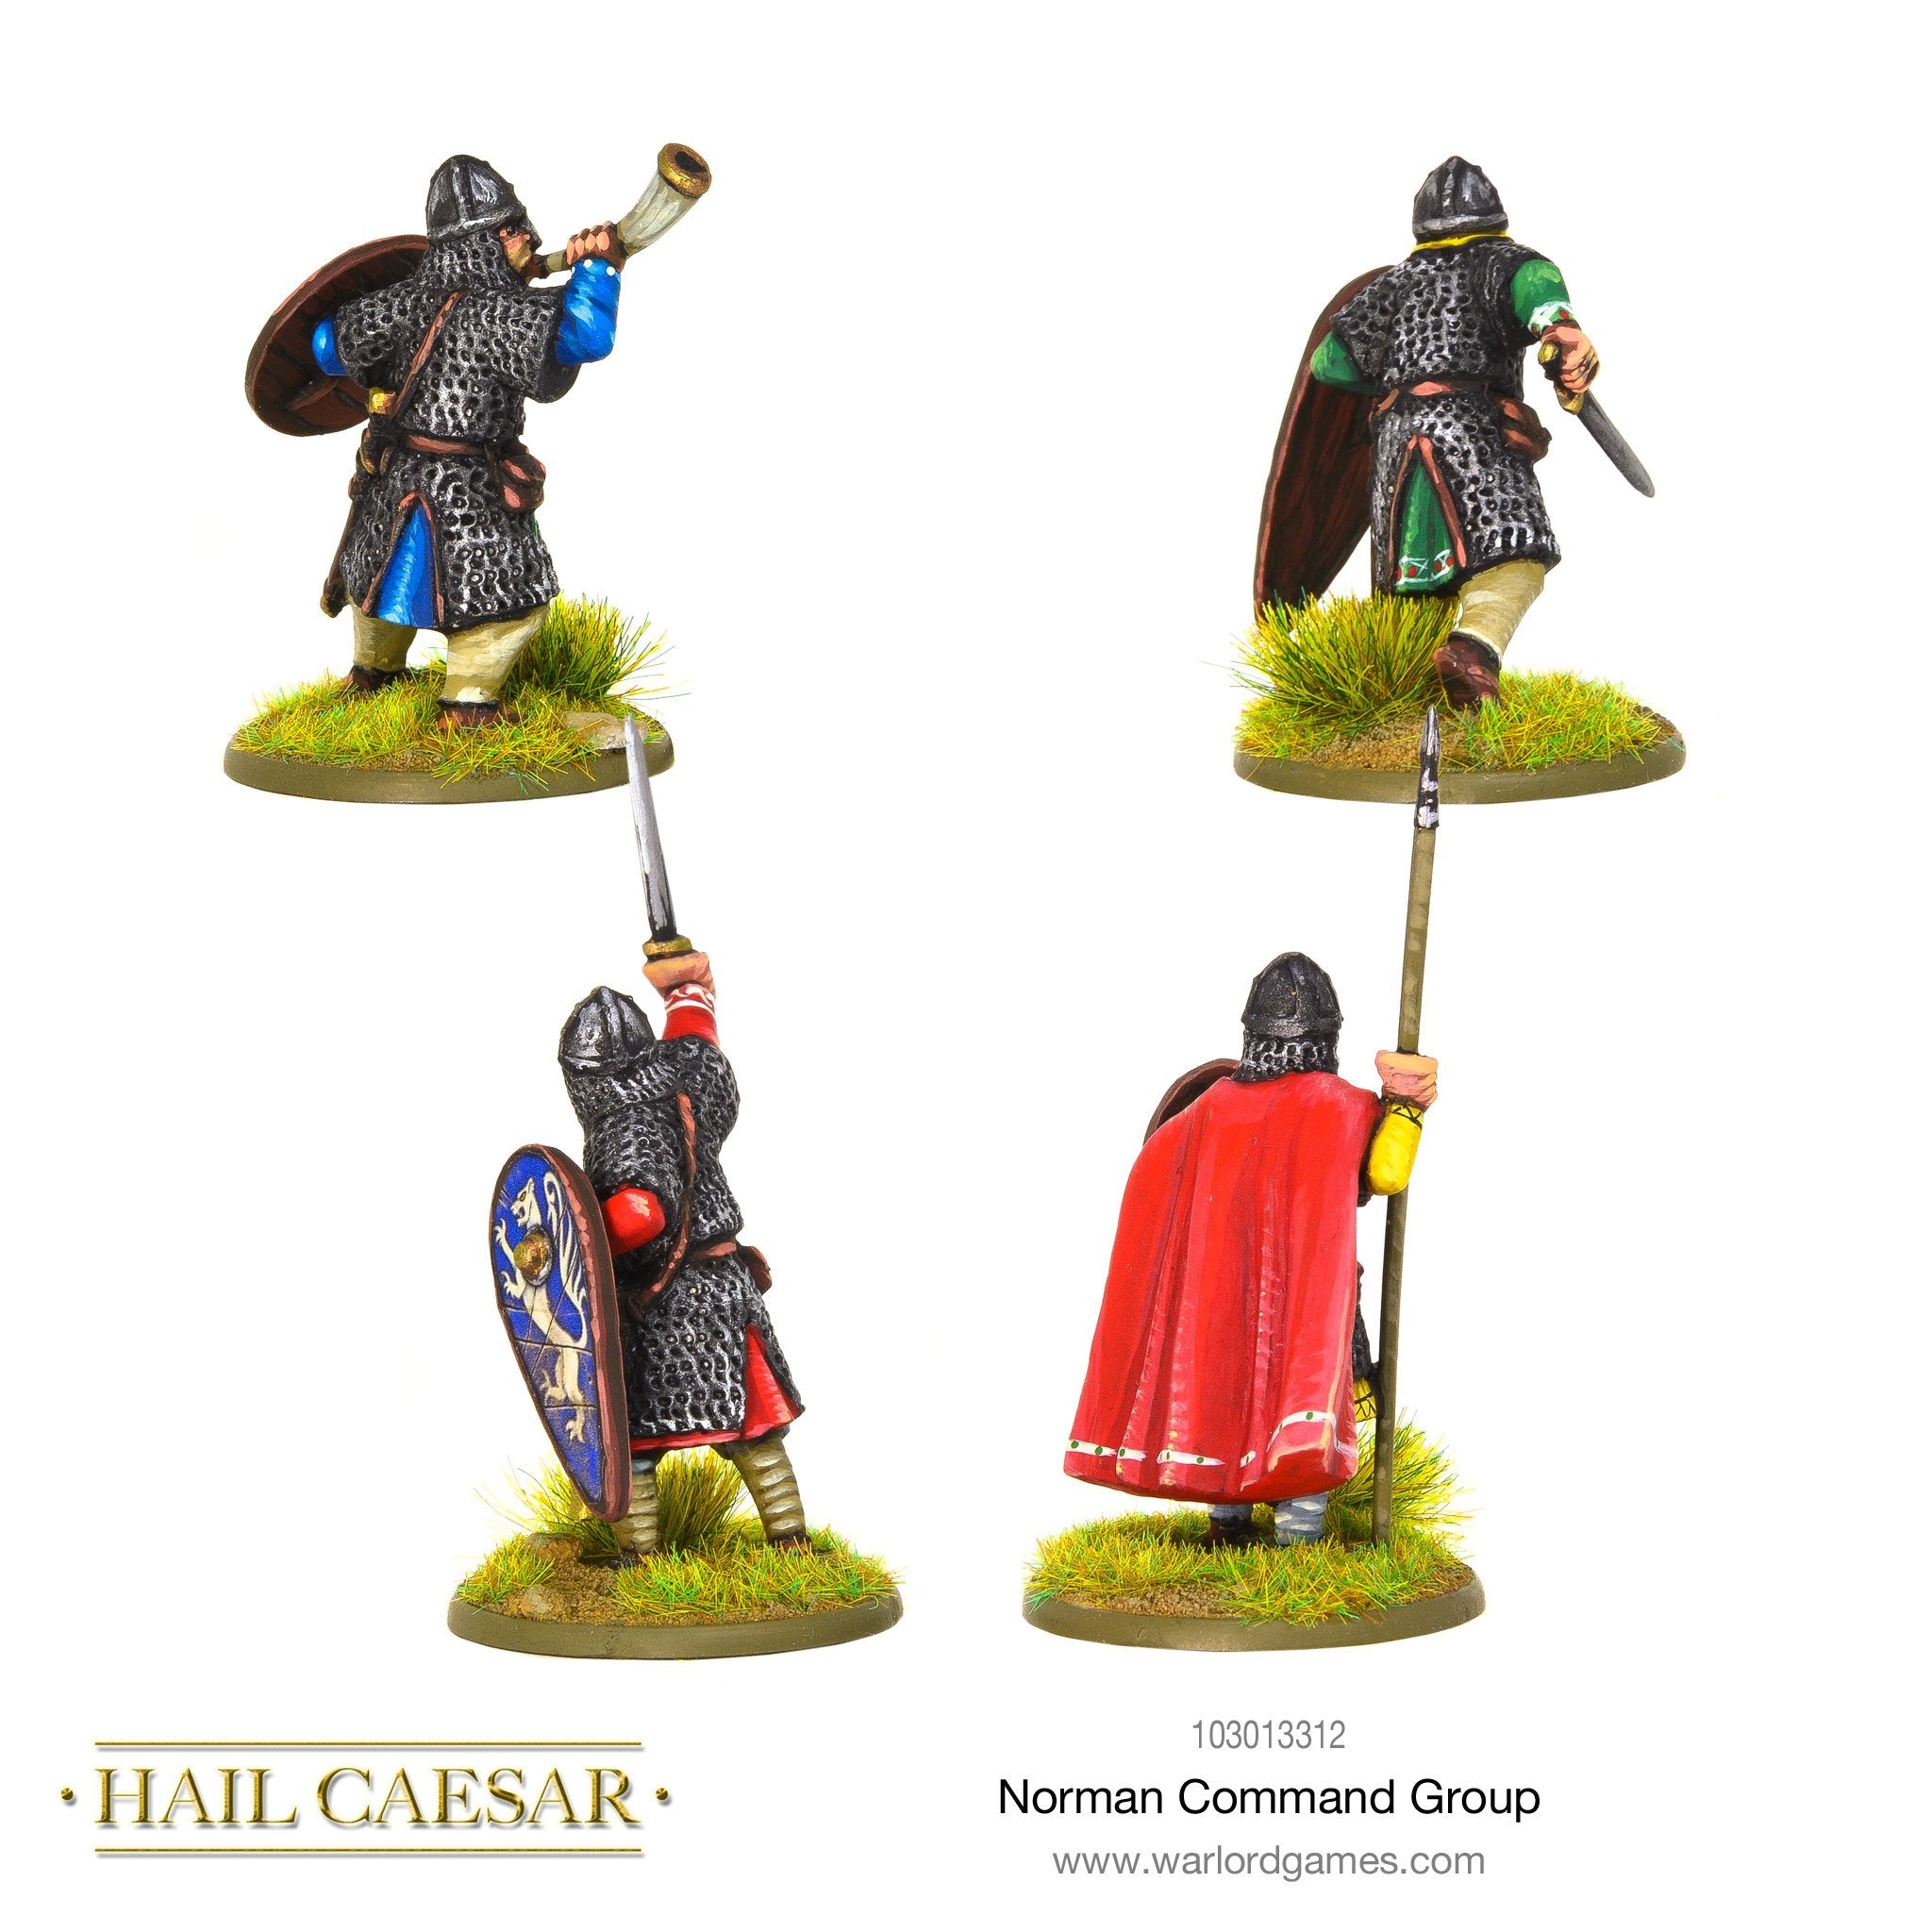 Norman command group